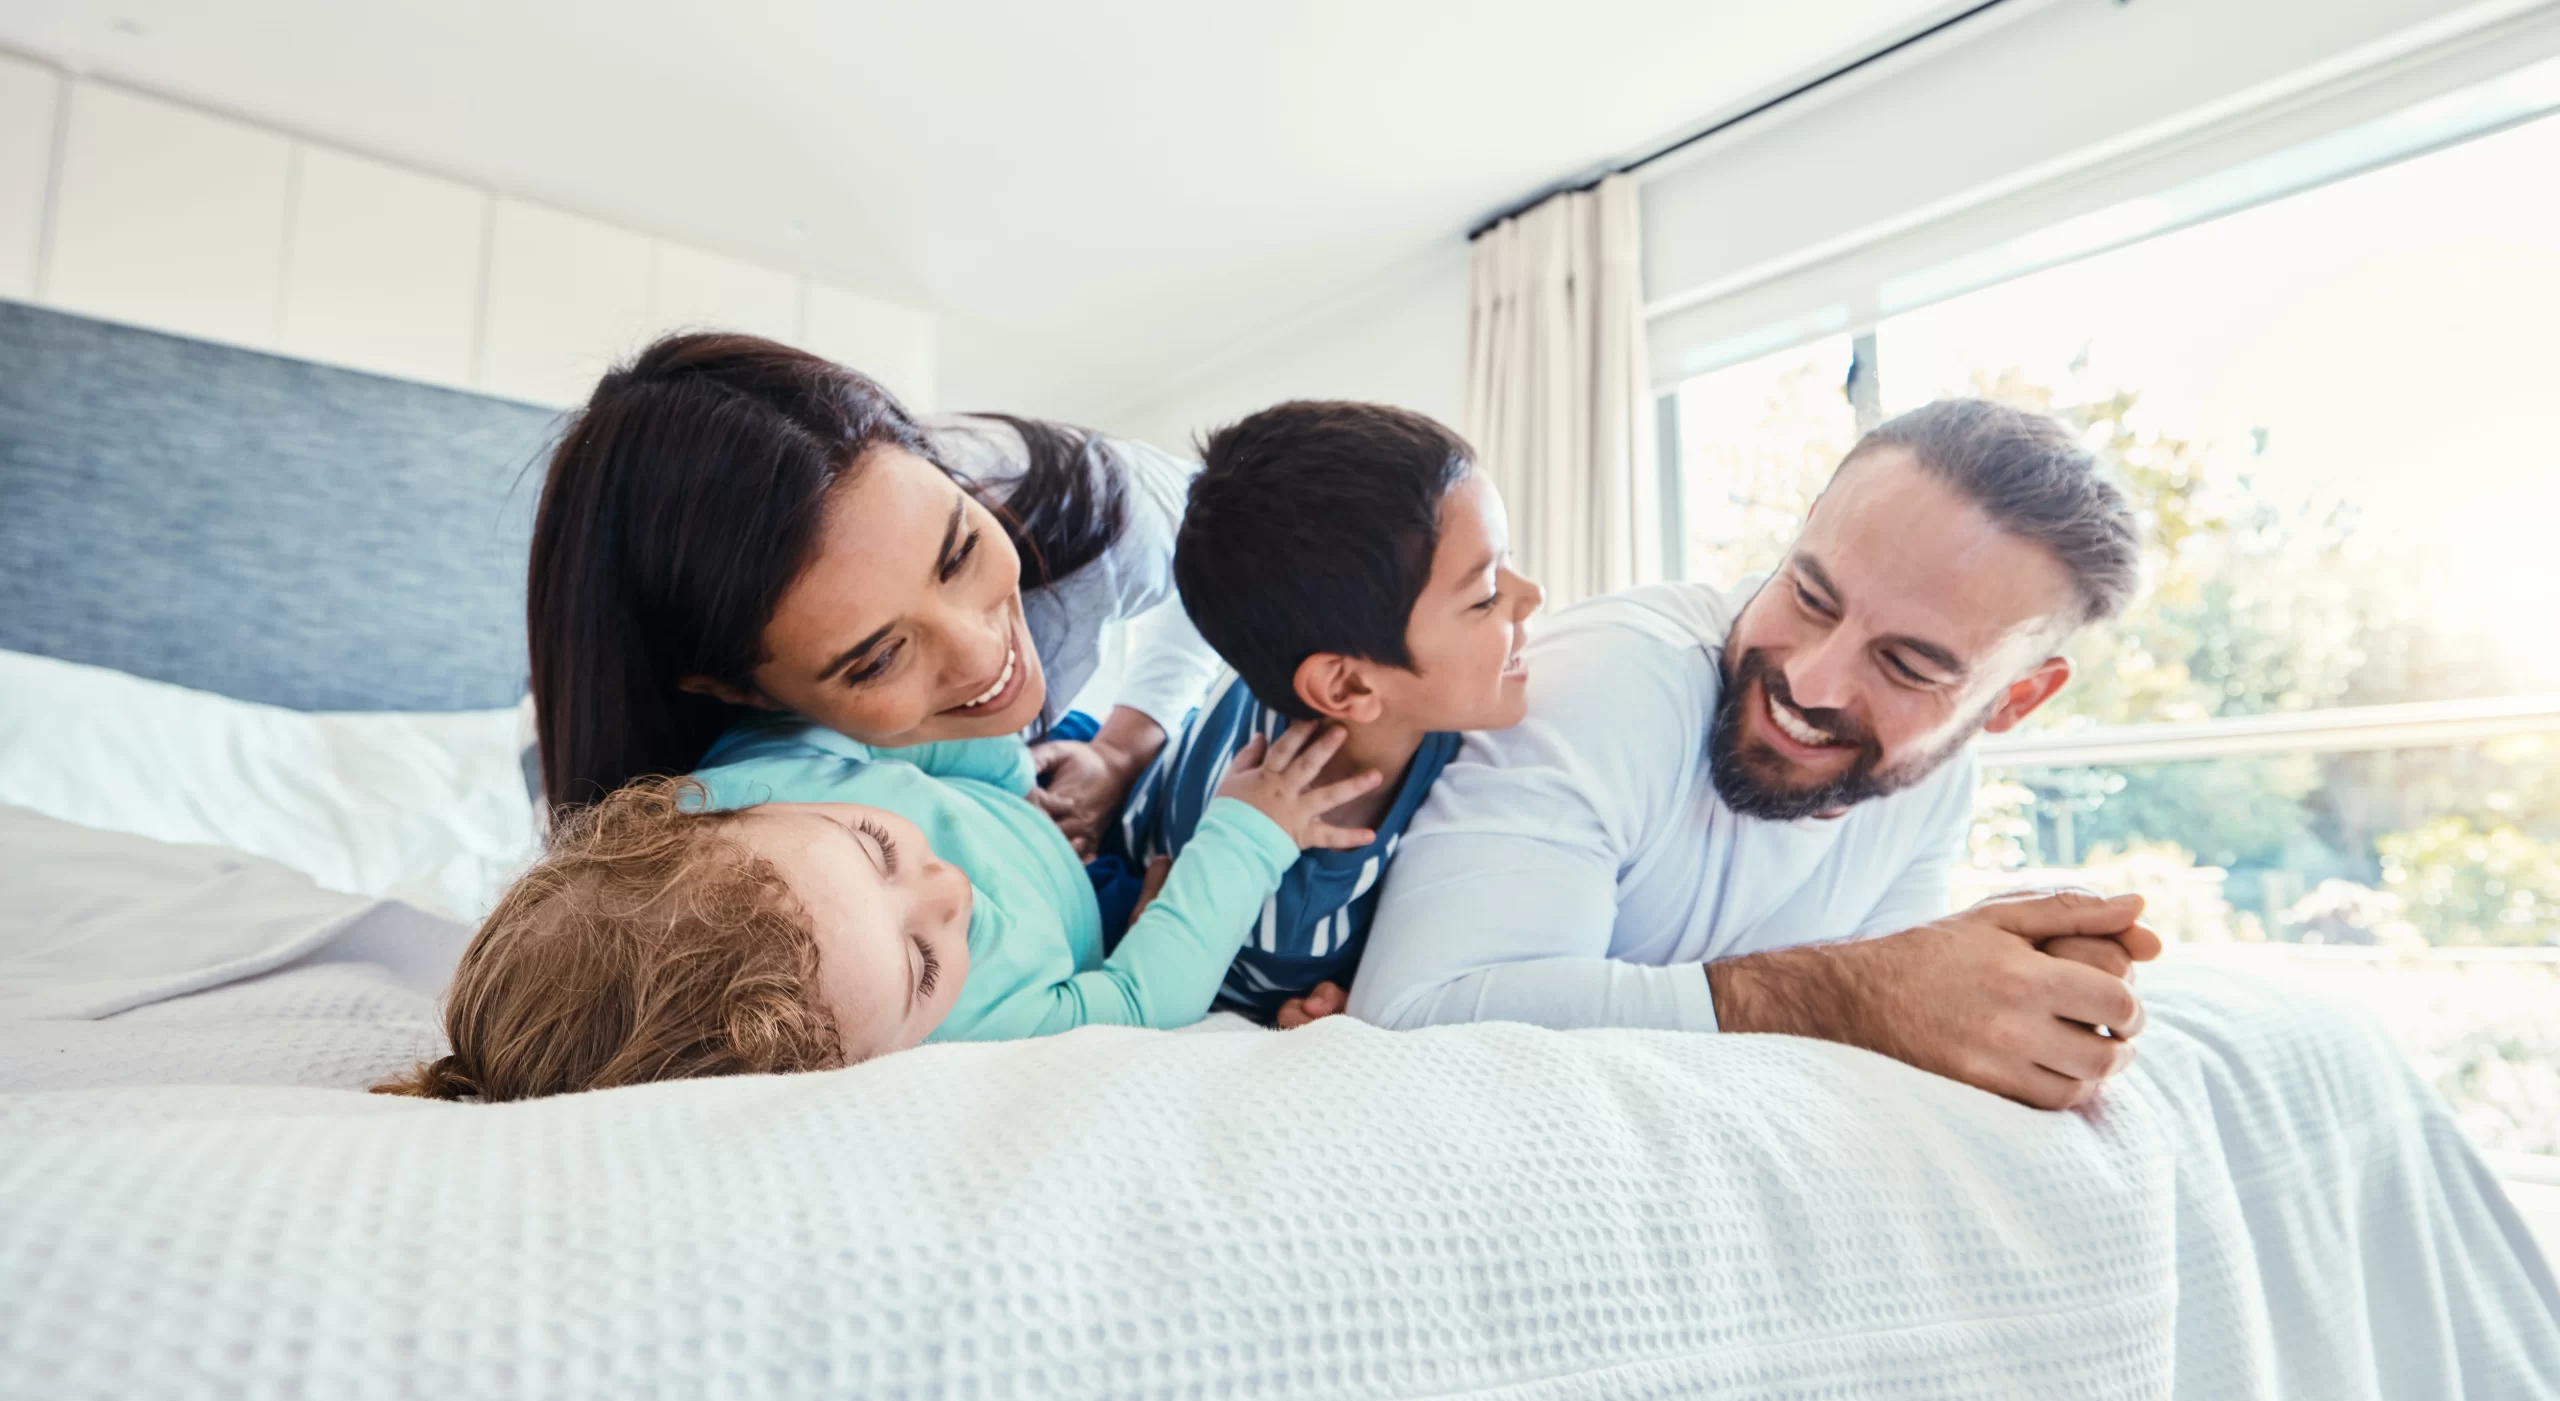 Family with two kids on the bed at home smiling and laughing together